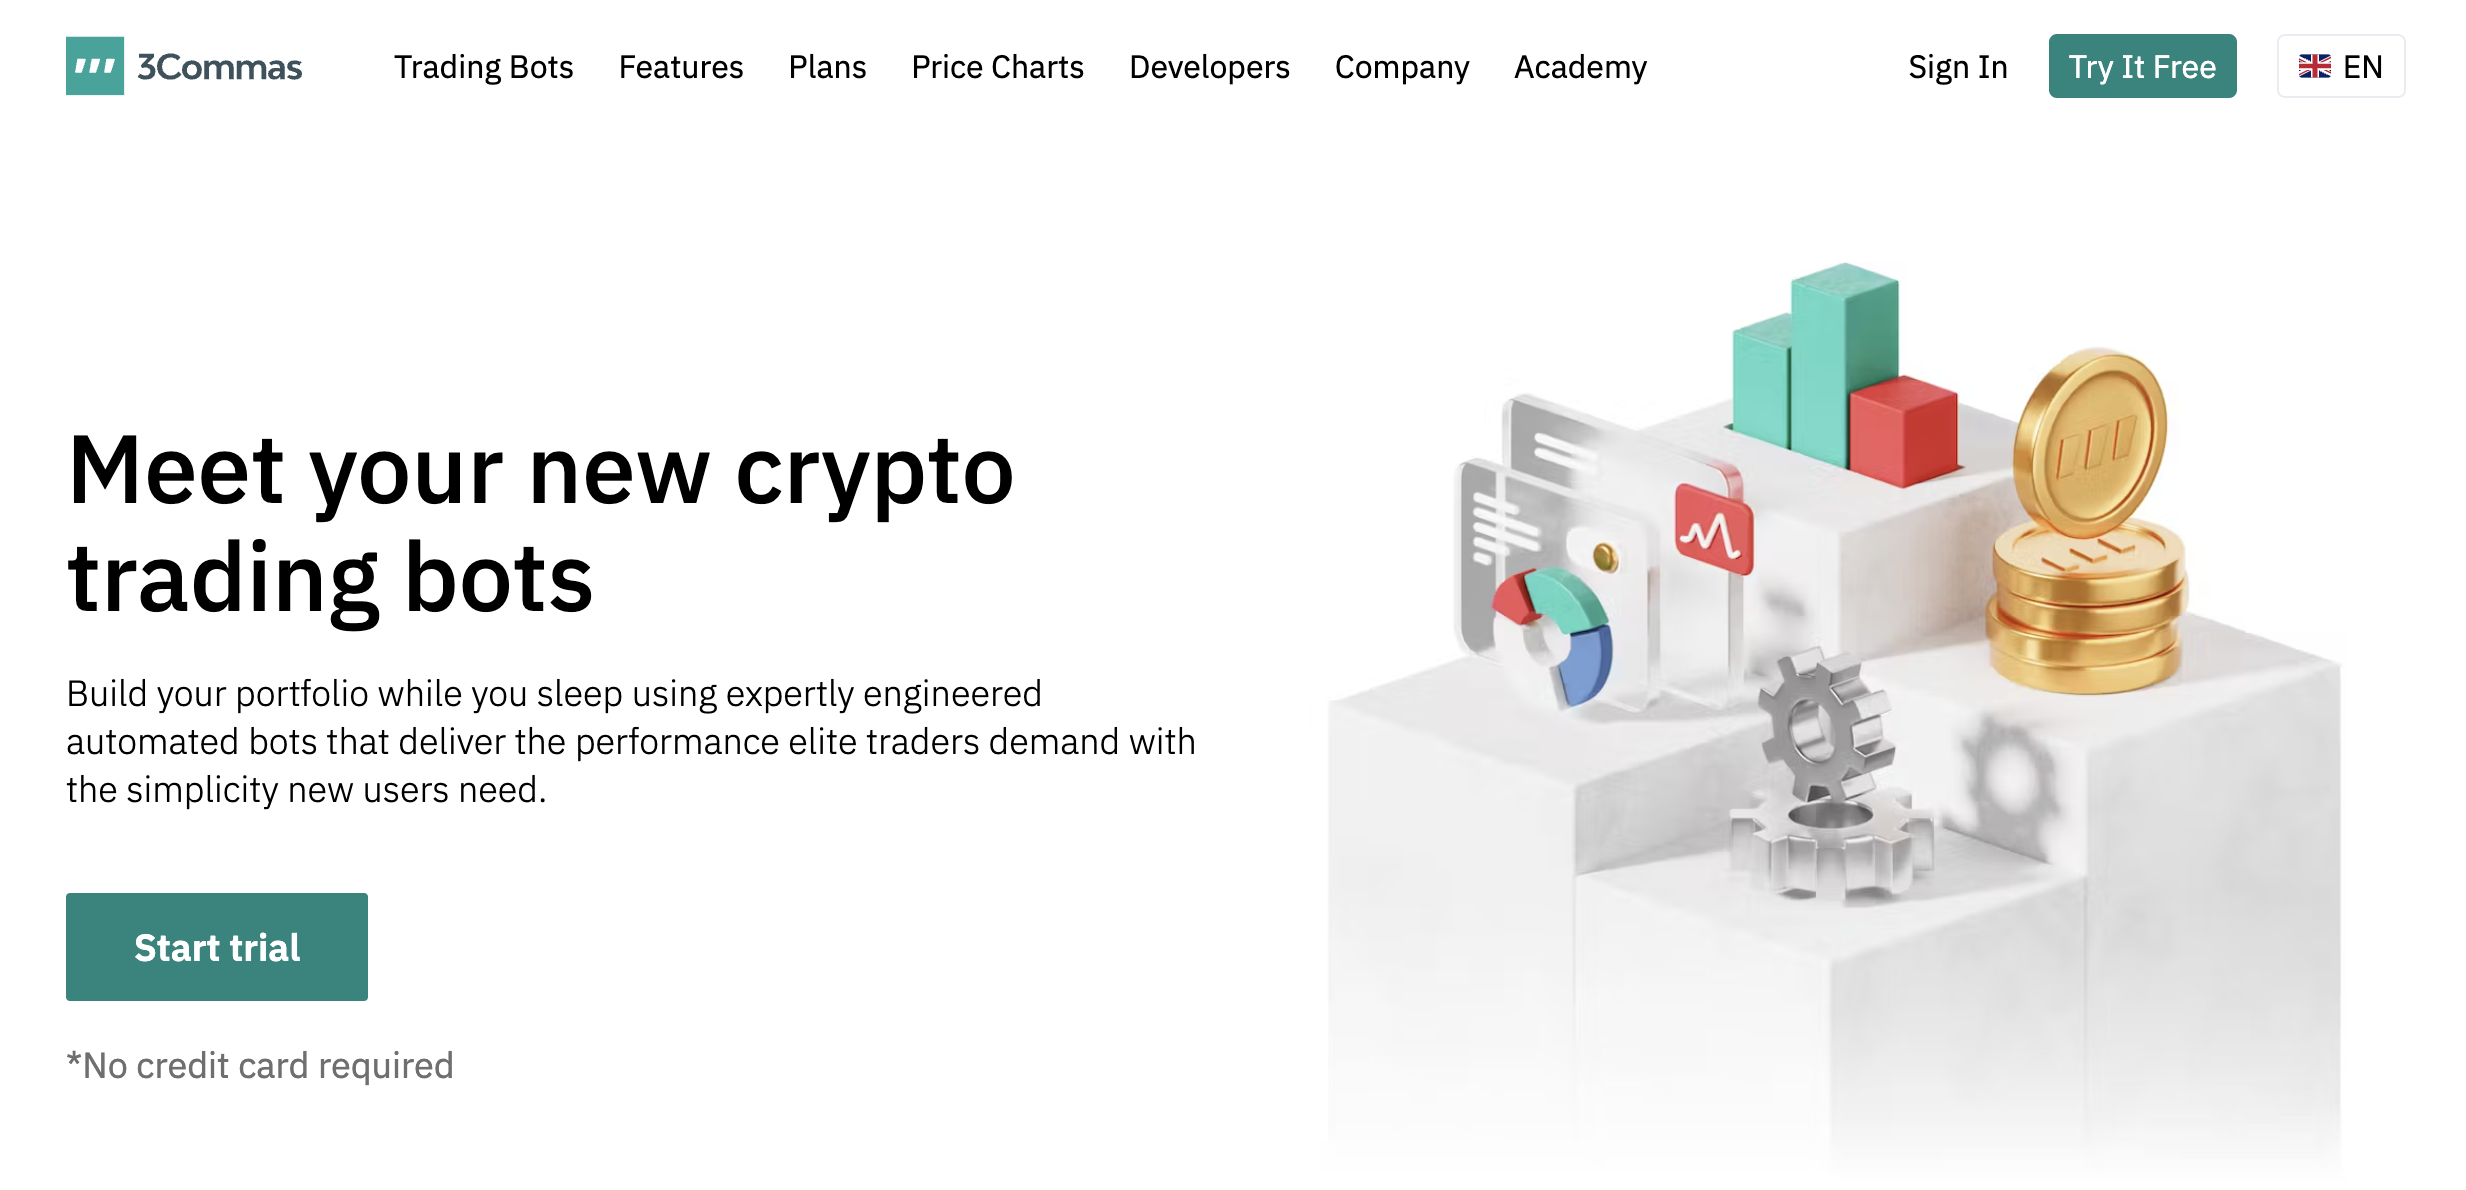 Best Crypto AI Trading Bots for [Reviewed]